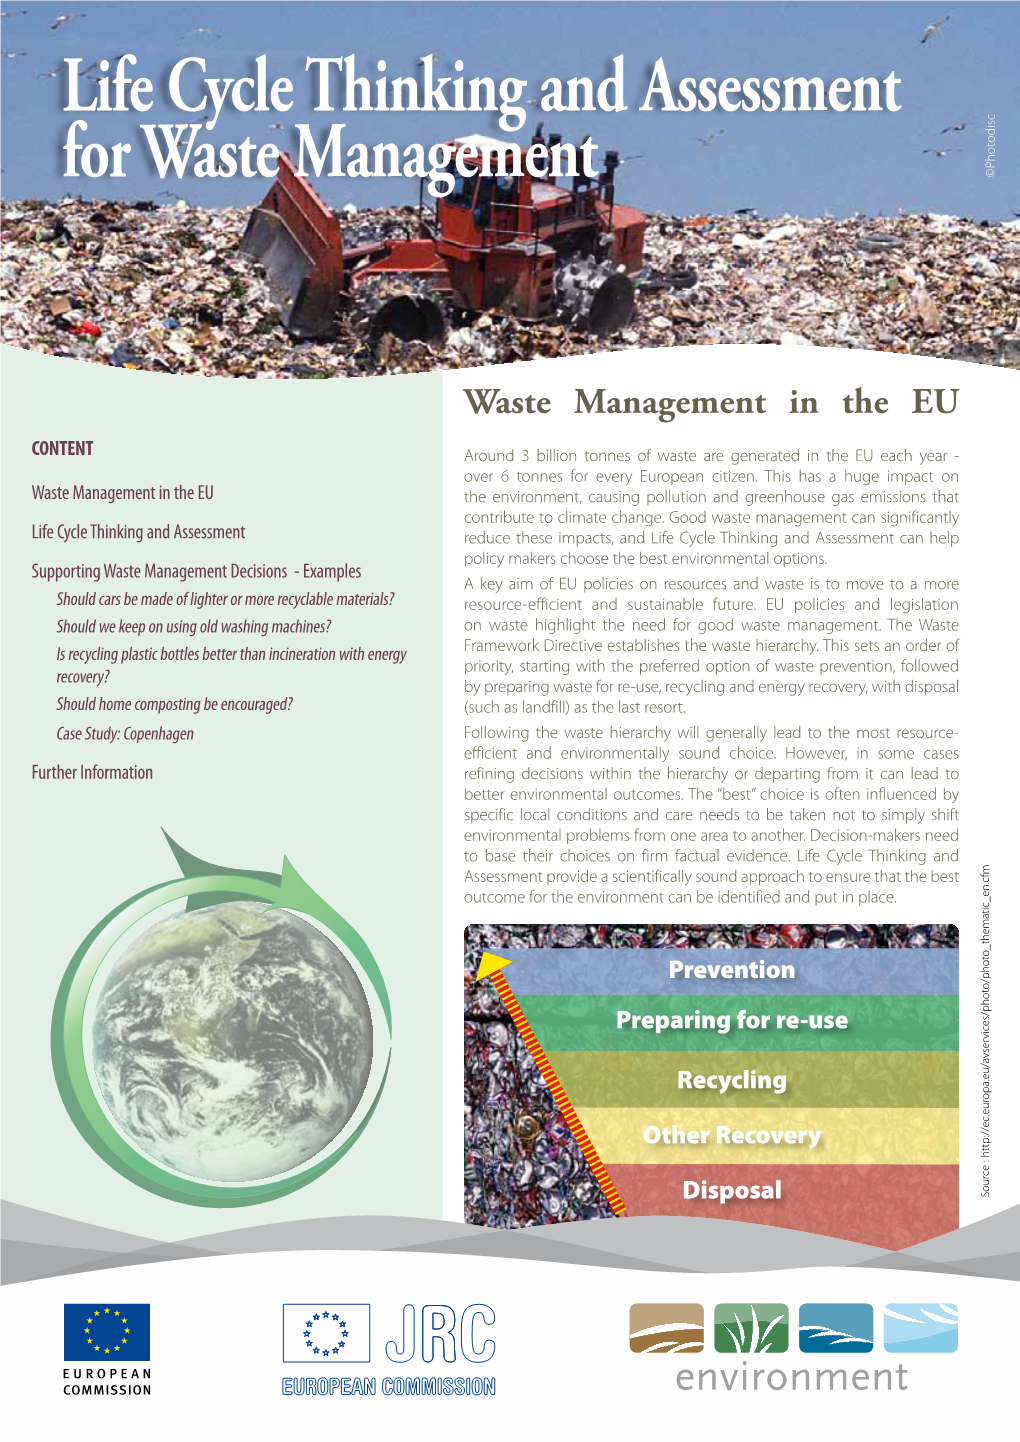 Life Cycle Thinking and Assessment for Waste Management